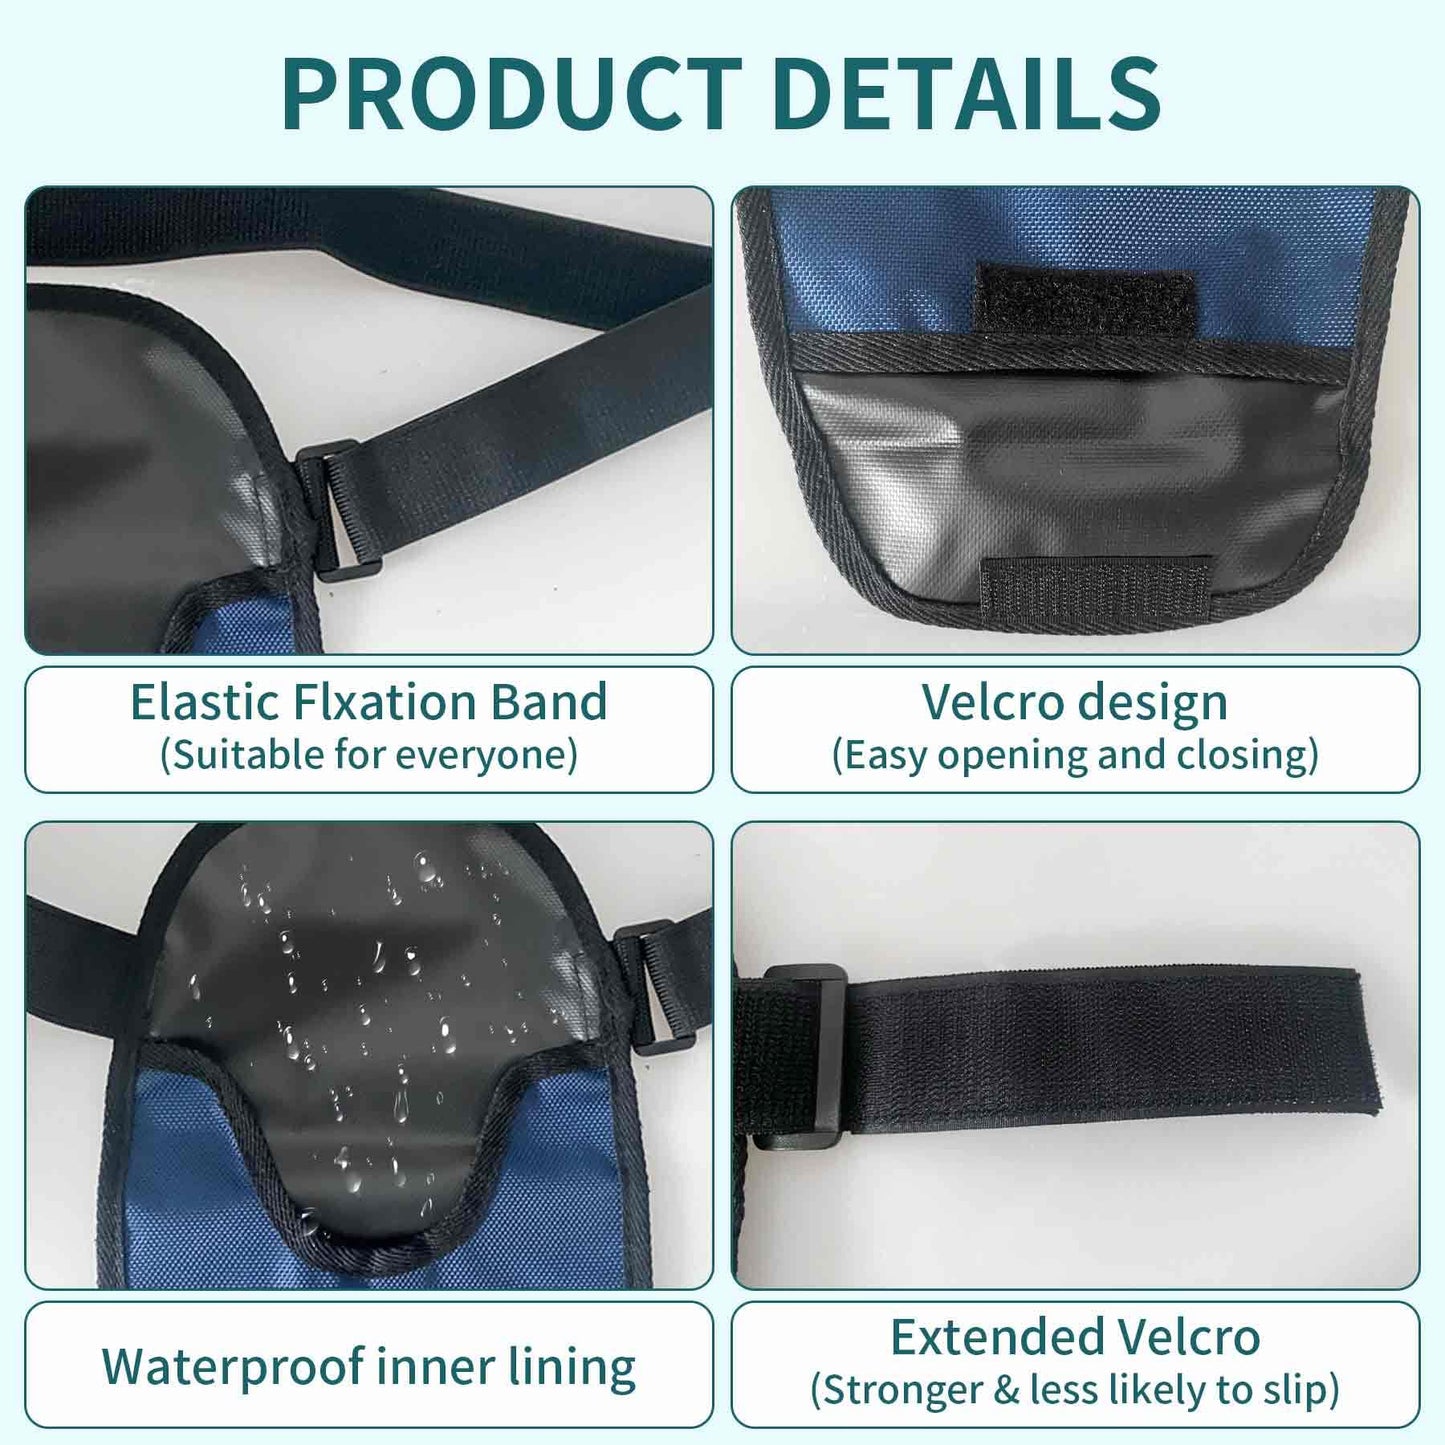 Ostomy Bag Covers,Waterproof Colostomy Bag covers for invisible Stoma Urostomy Ileostomy Bag Ostomy Supplies for Women Men